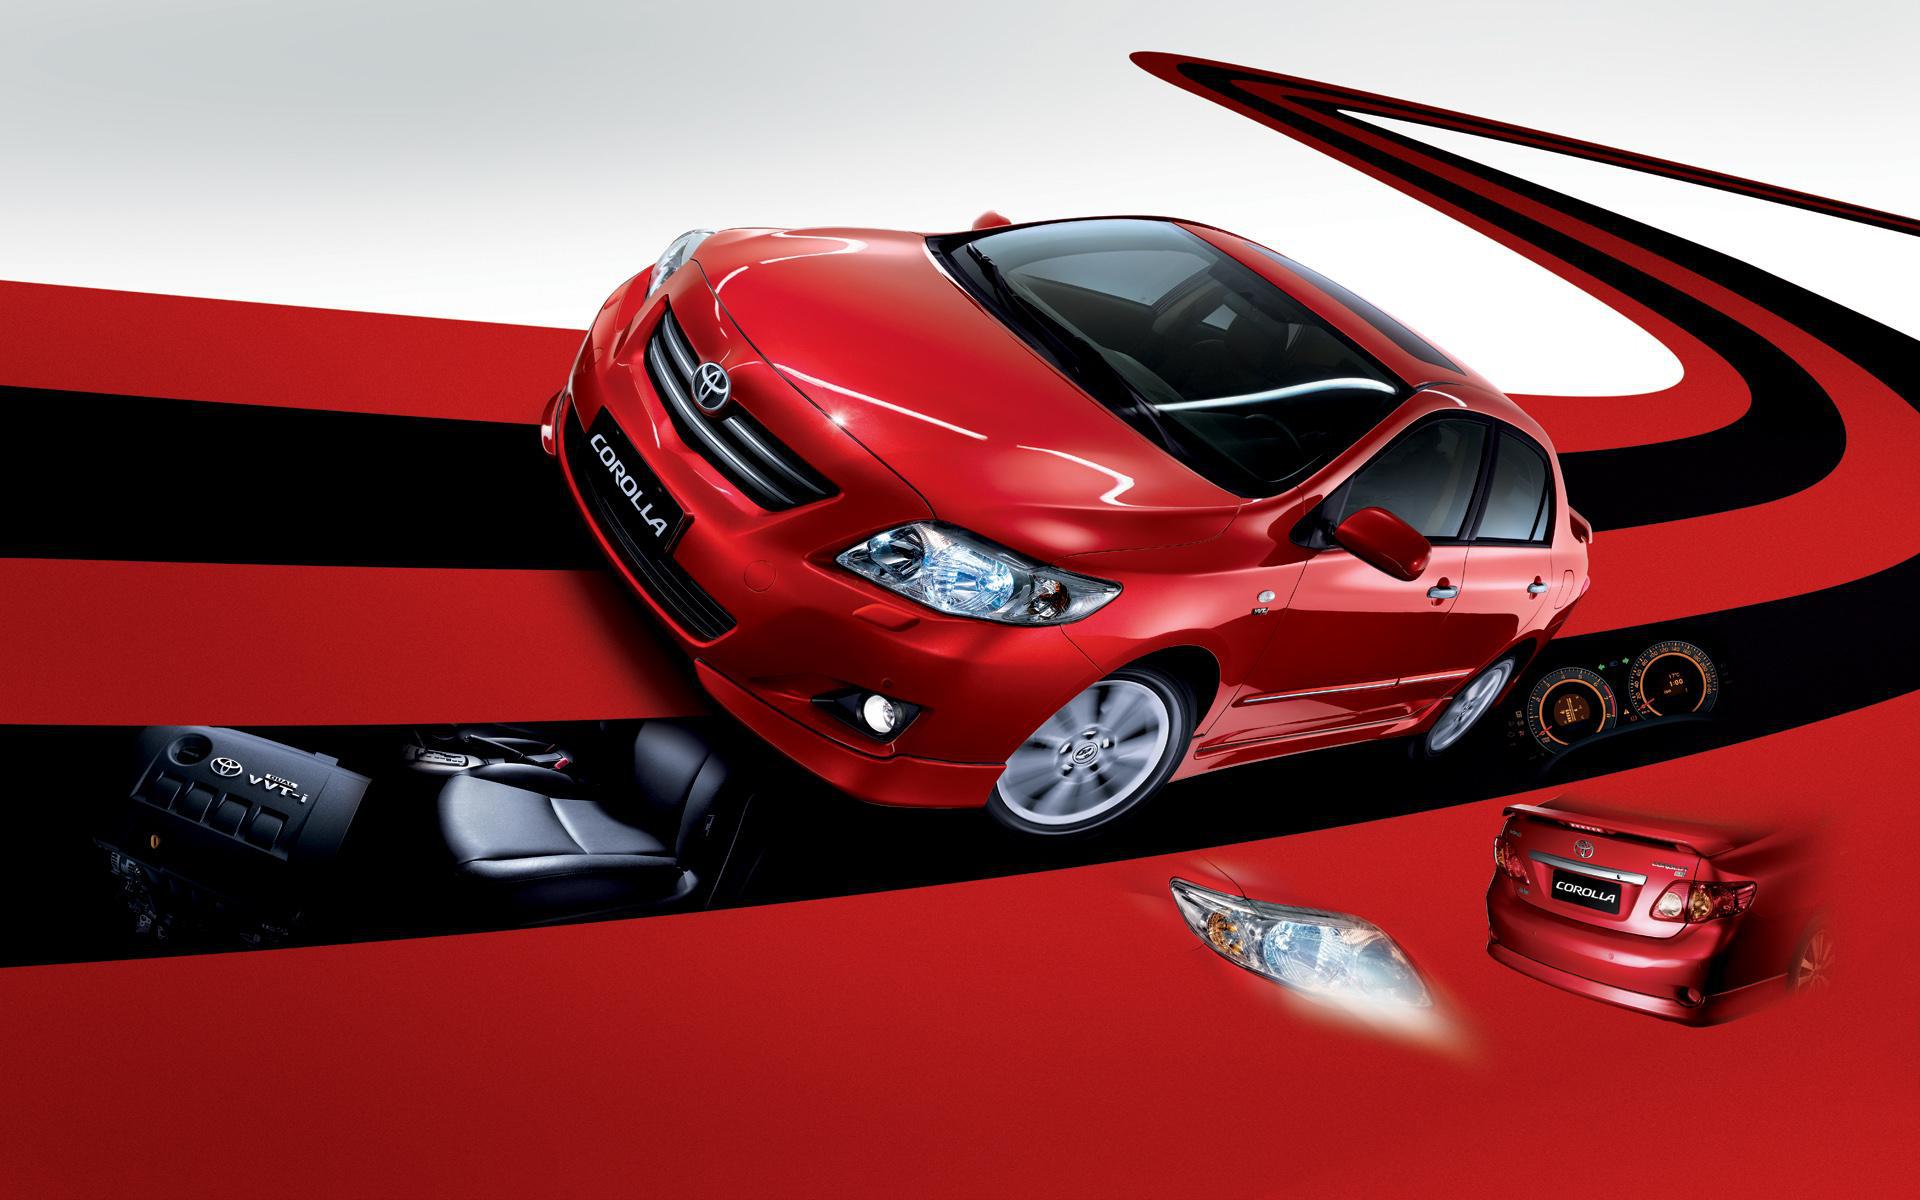 Design of the car Toyota Corolla wallpapers and images